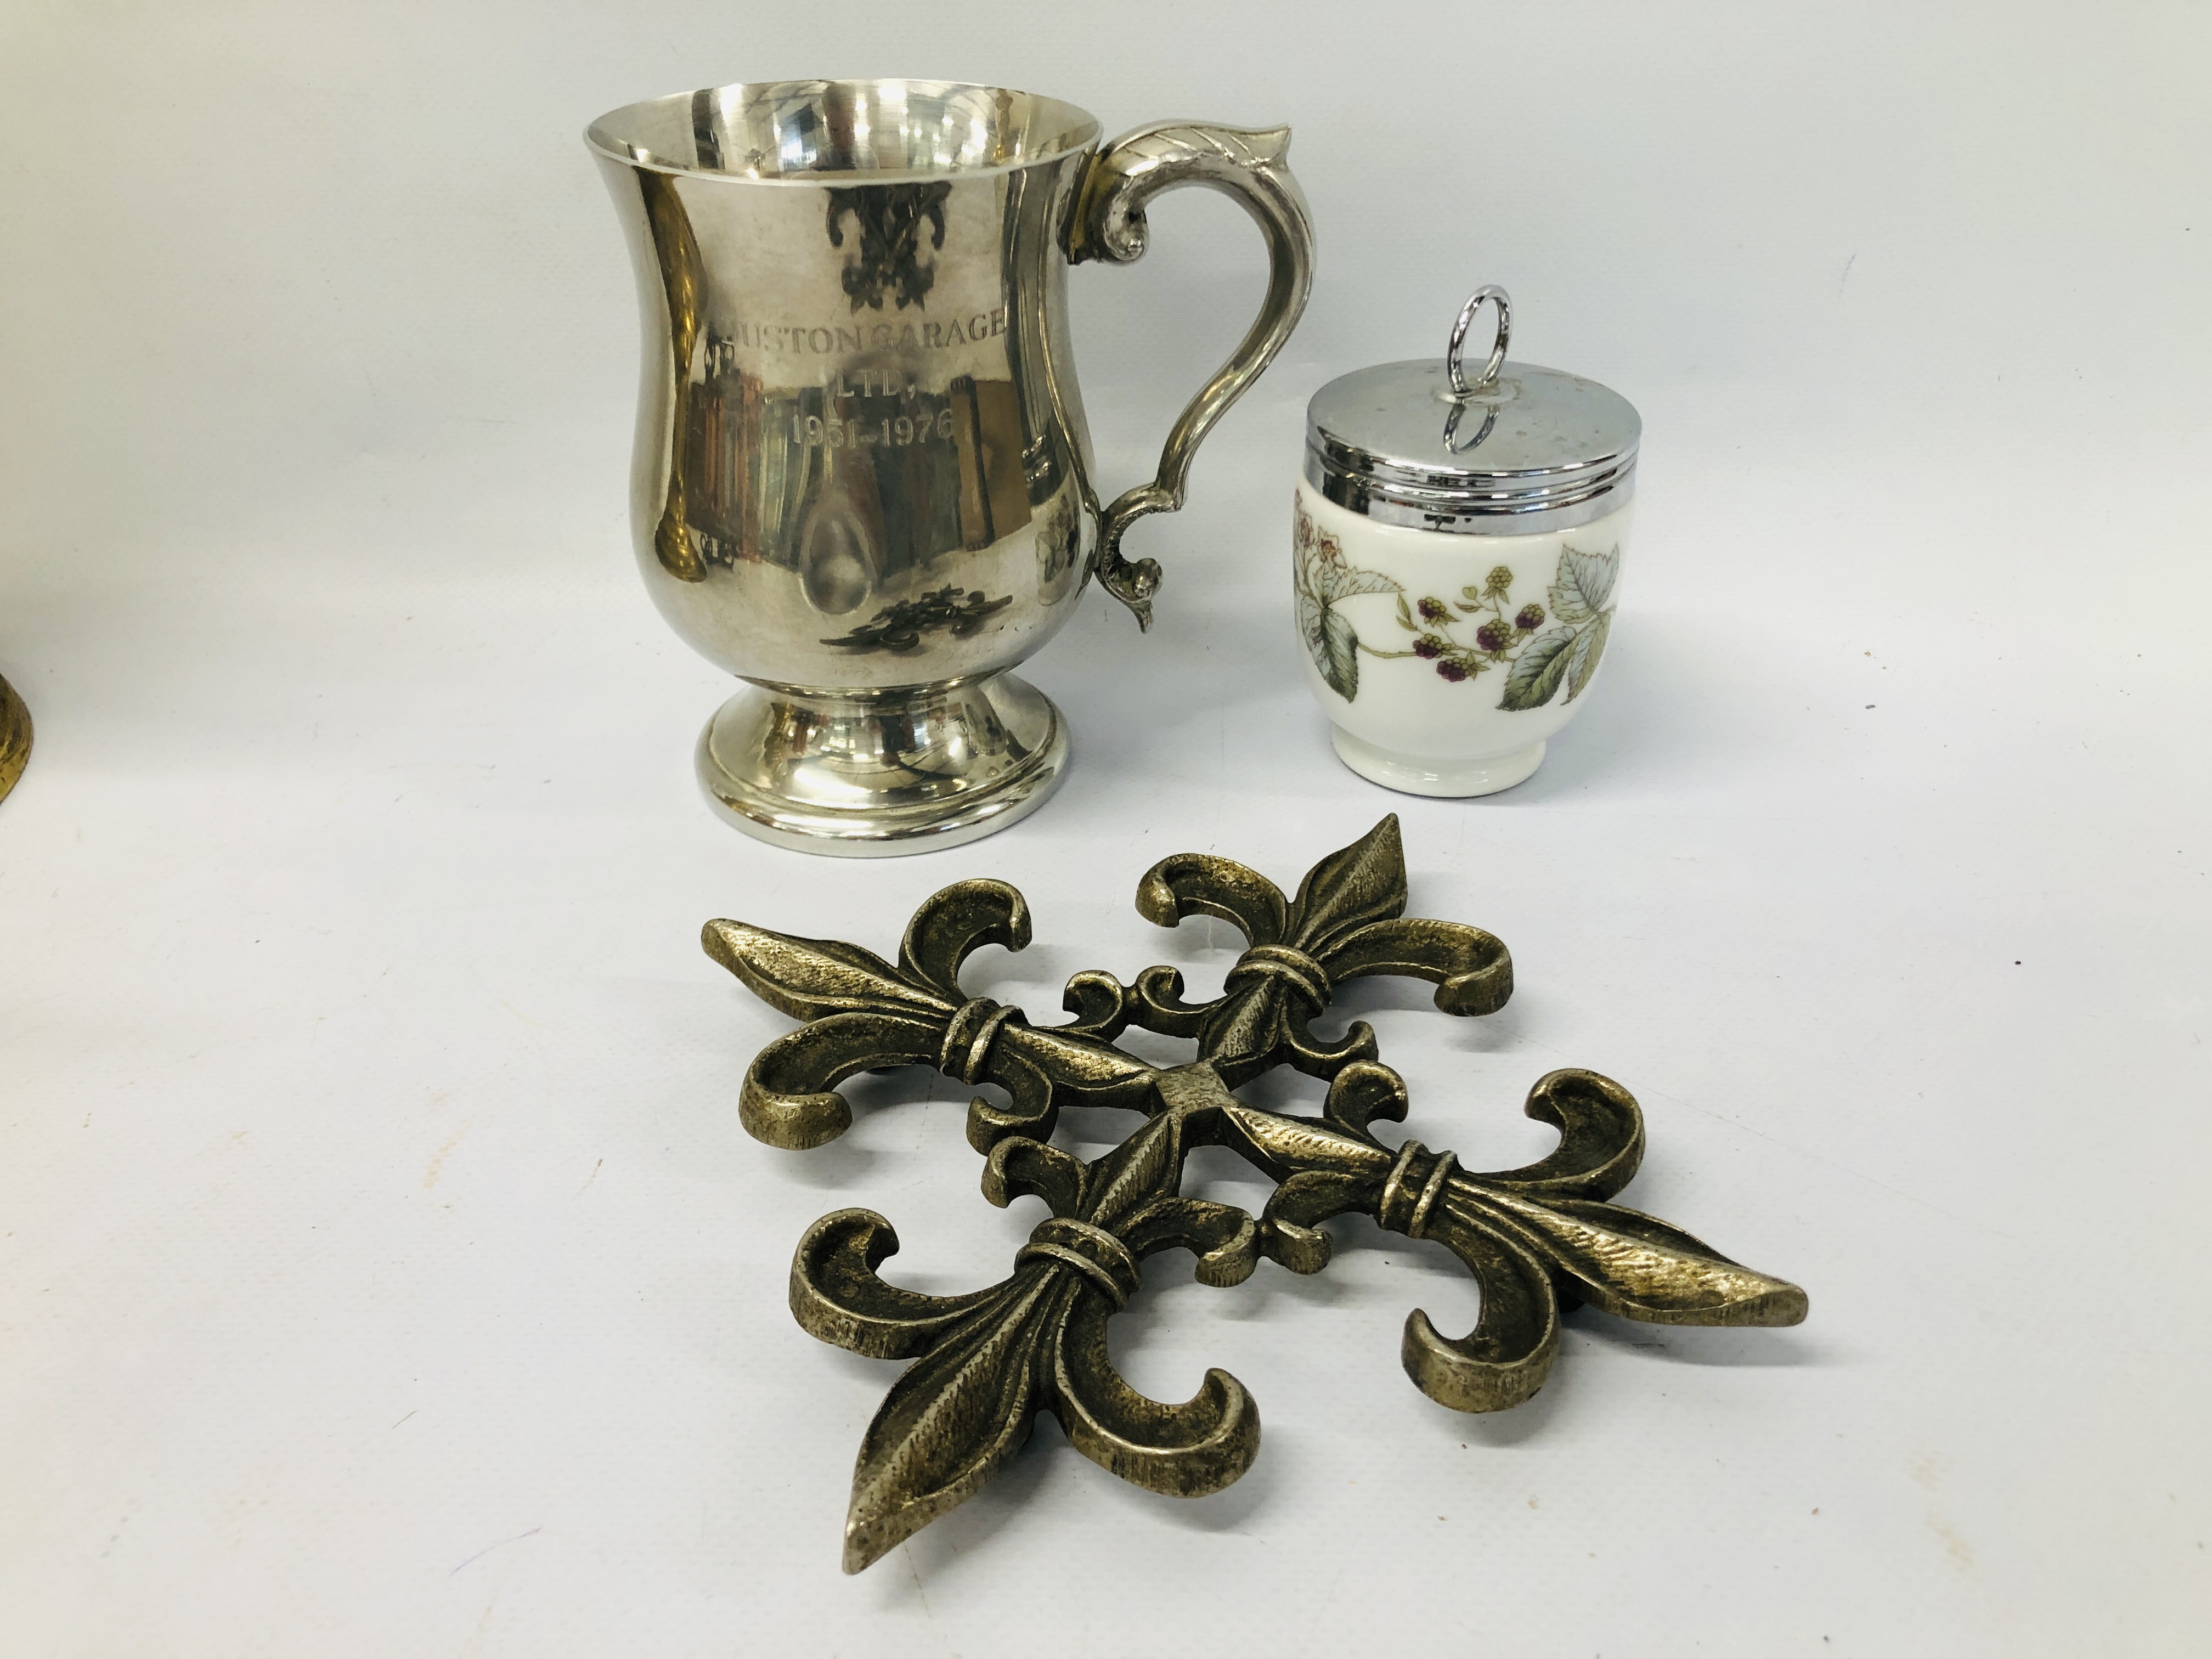 MIXED BRASS AND COPPER TO INCLUDE OIL LAMPS, LAMPS, STOVE, TRIVET, WATERING CAN, SCALES, CUPS, - Image 15 of 27